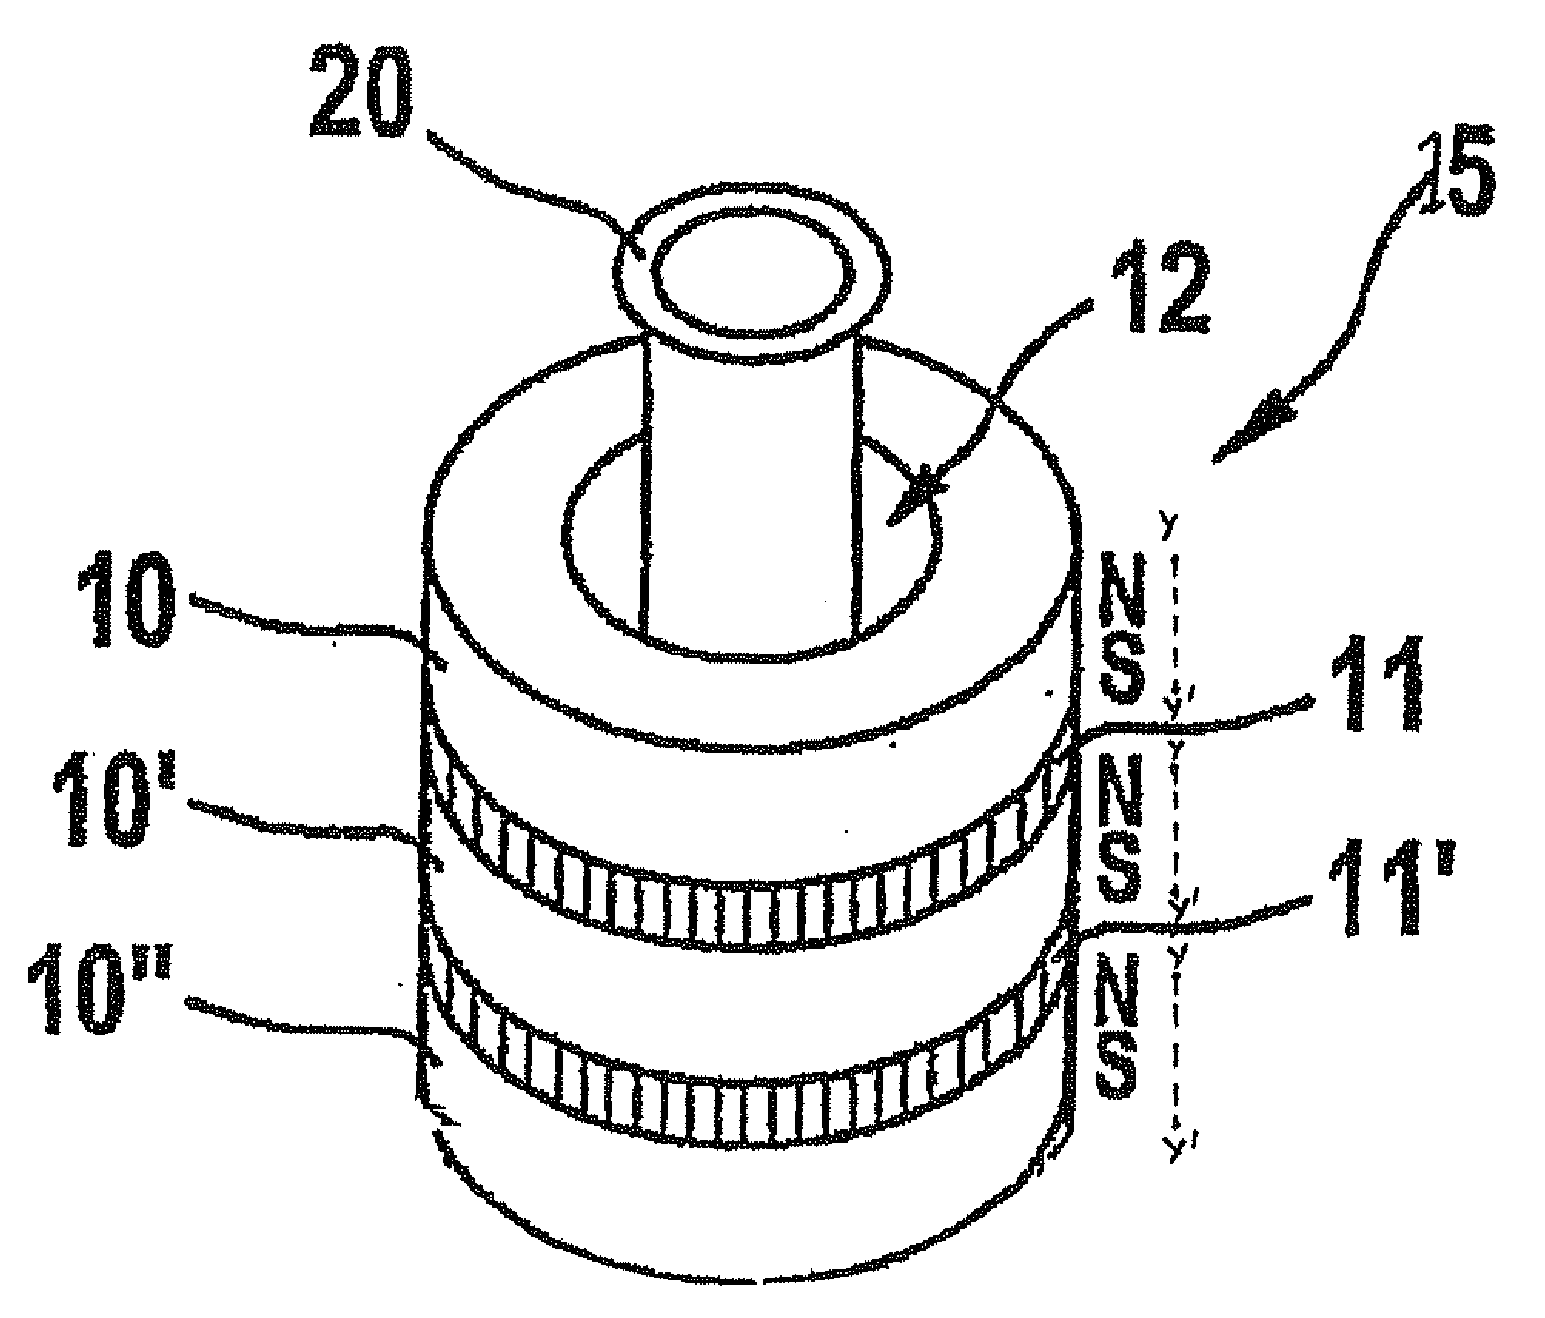 Magnetising portion for a magnetic separation device